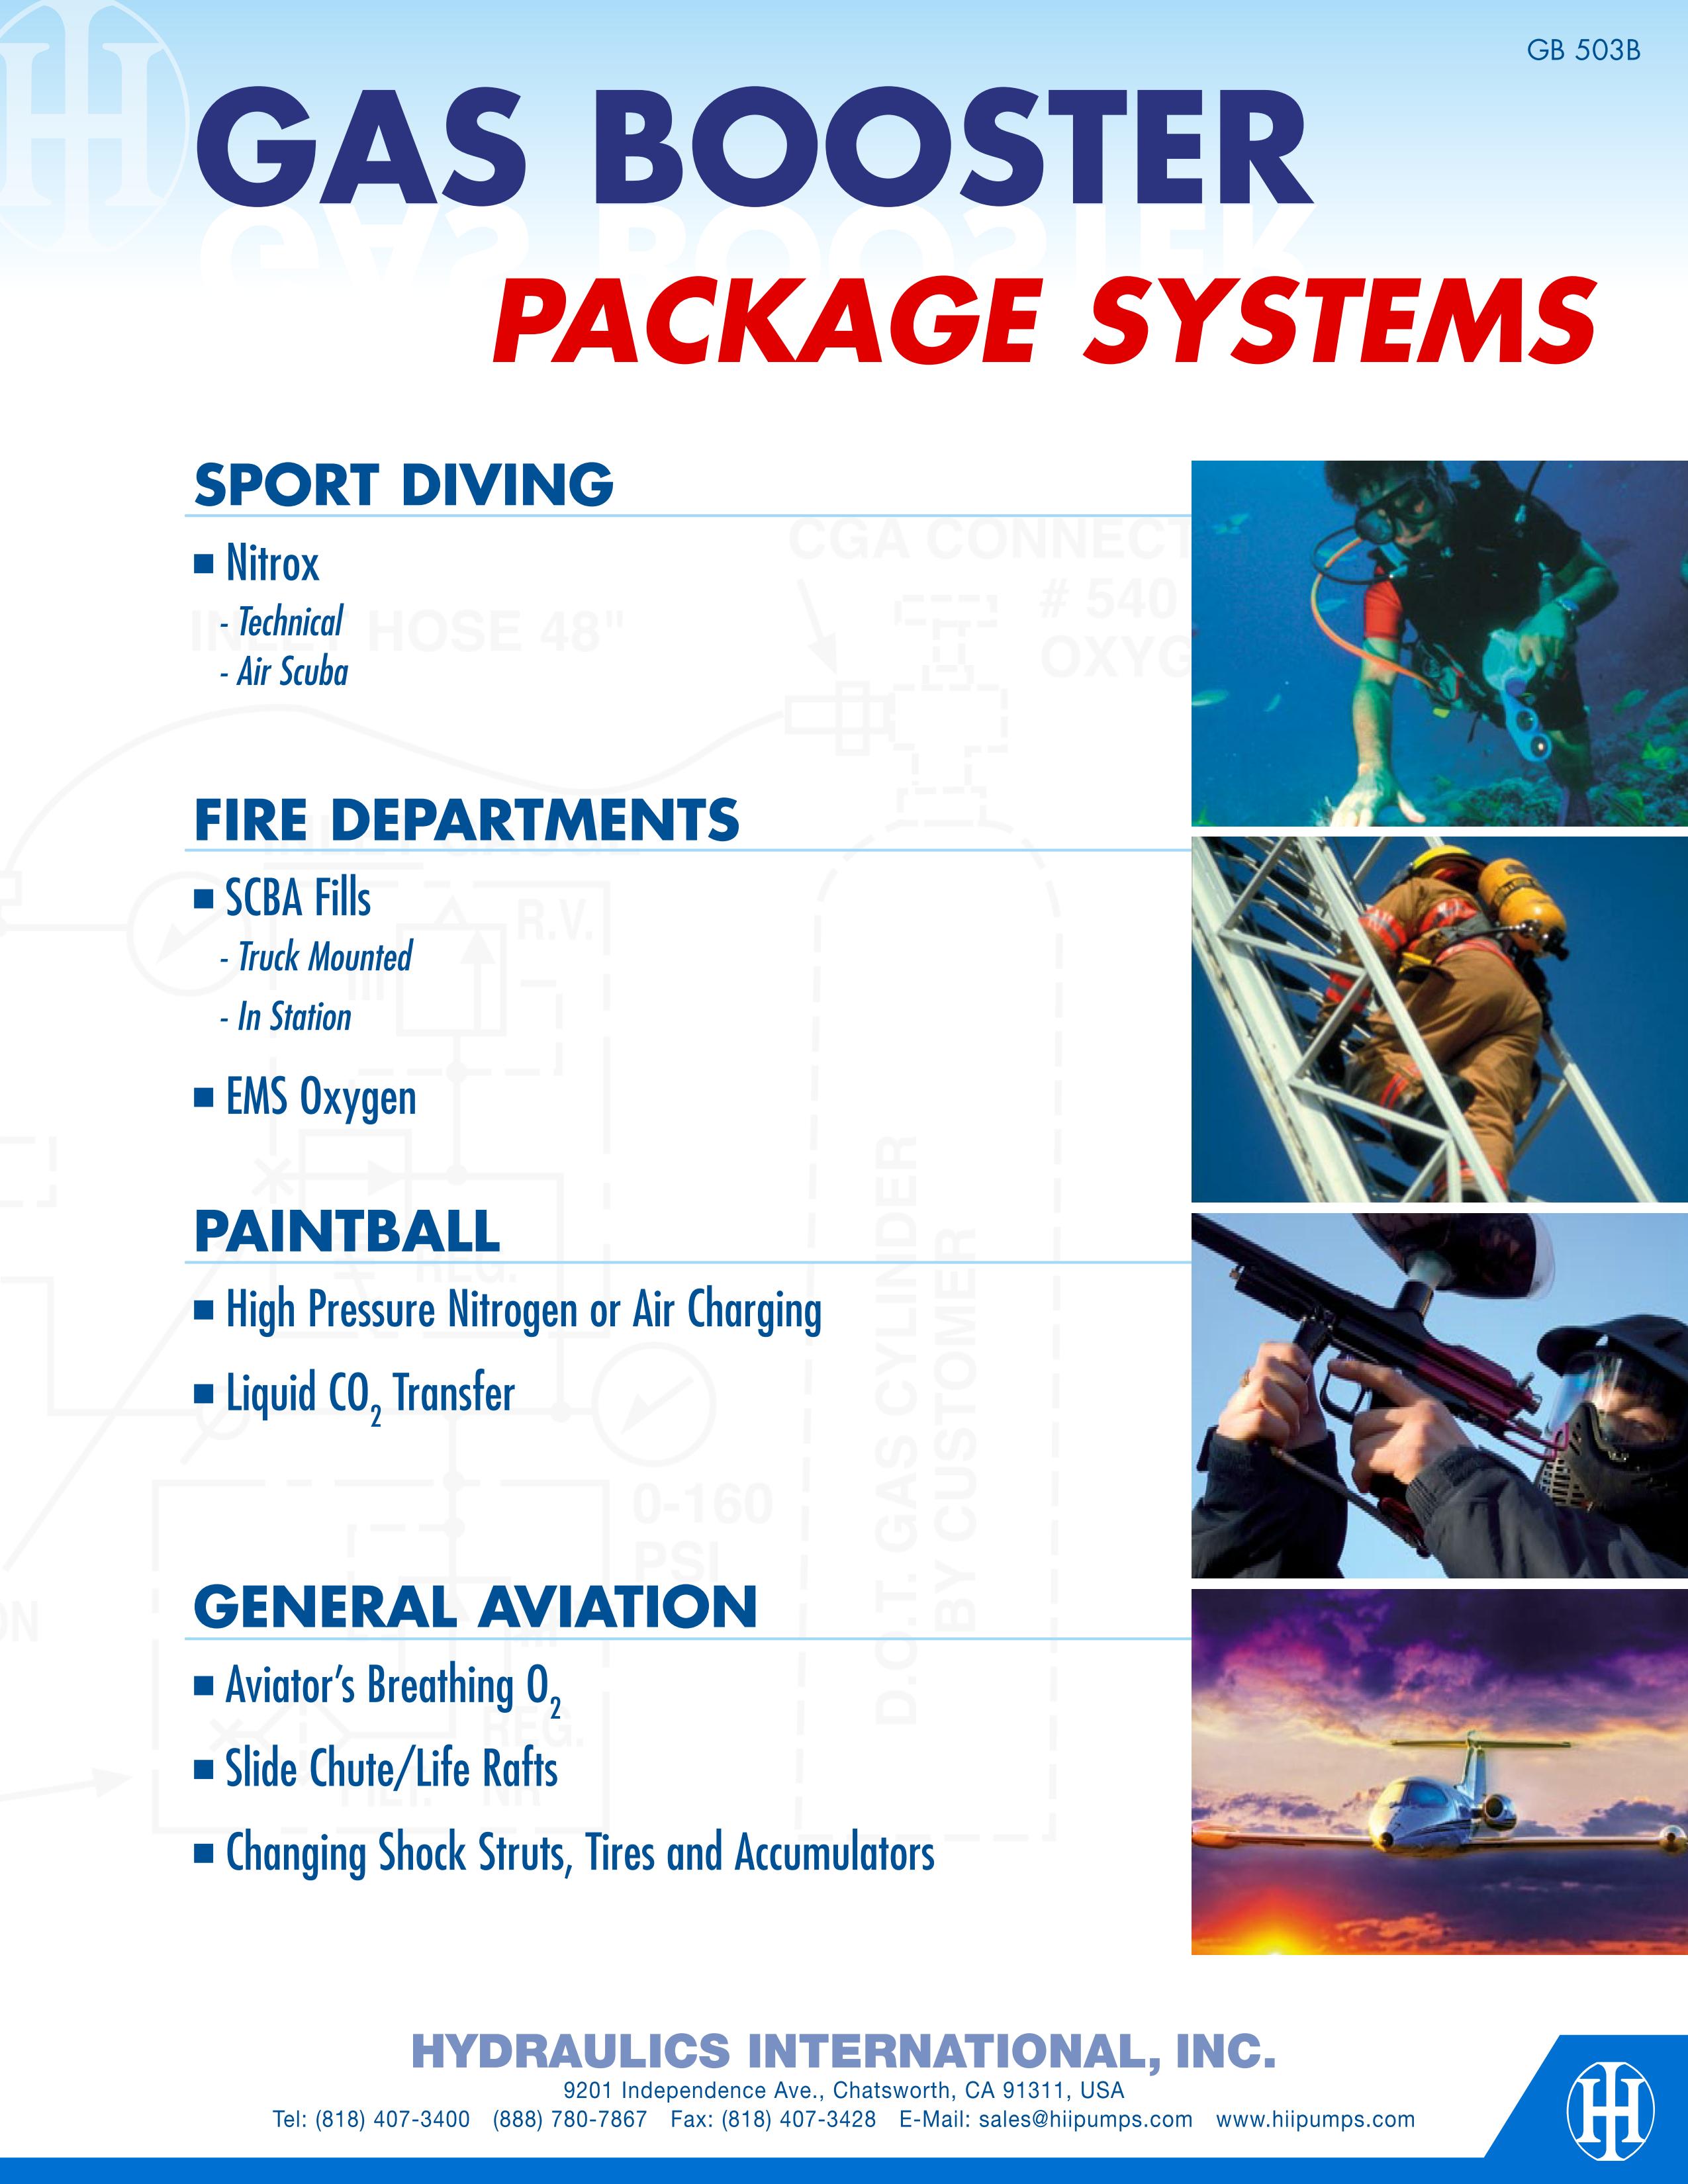 Gas booster package systems for sport diving, fire departments, paintball, general aviation